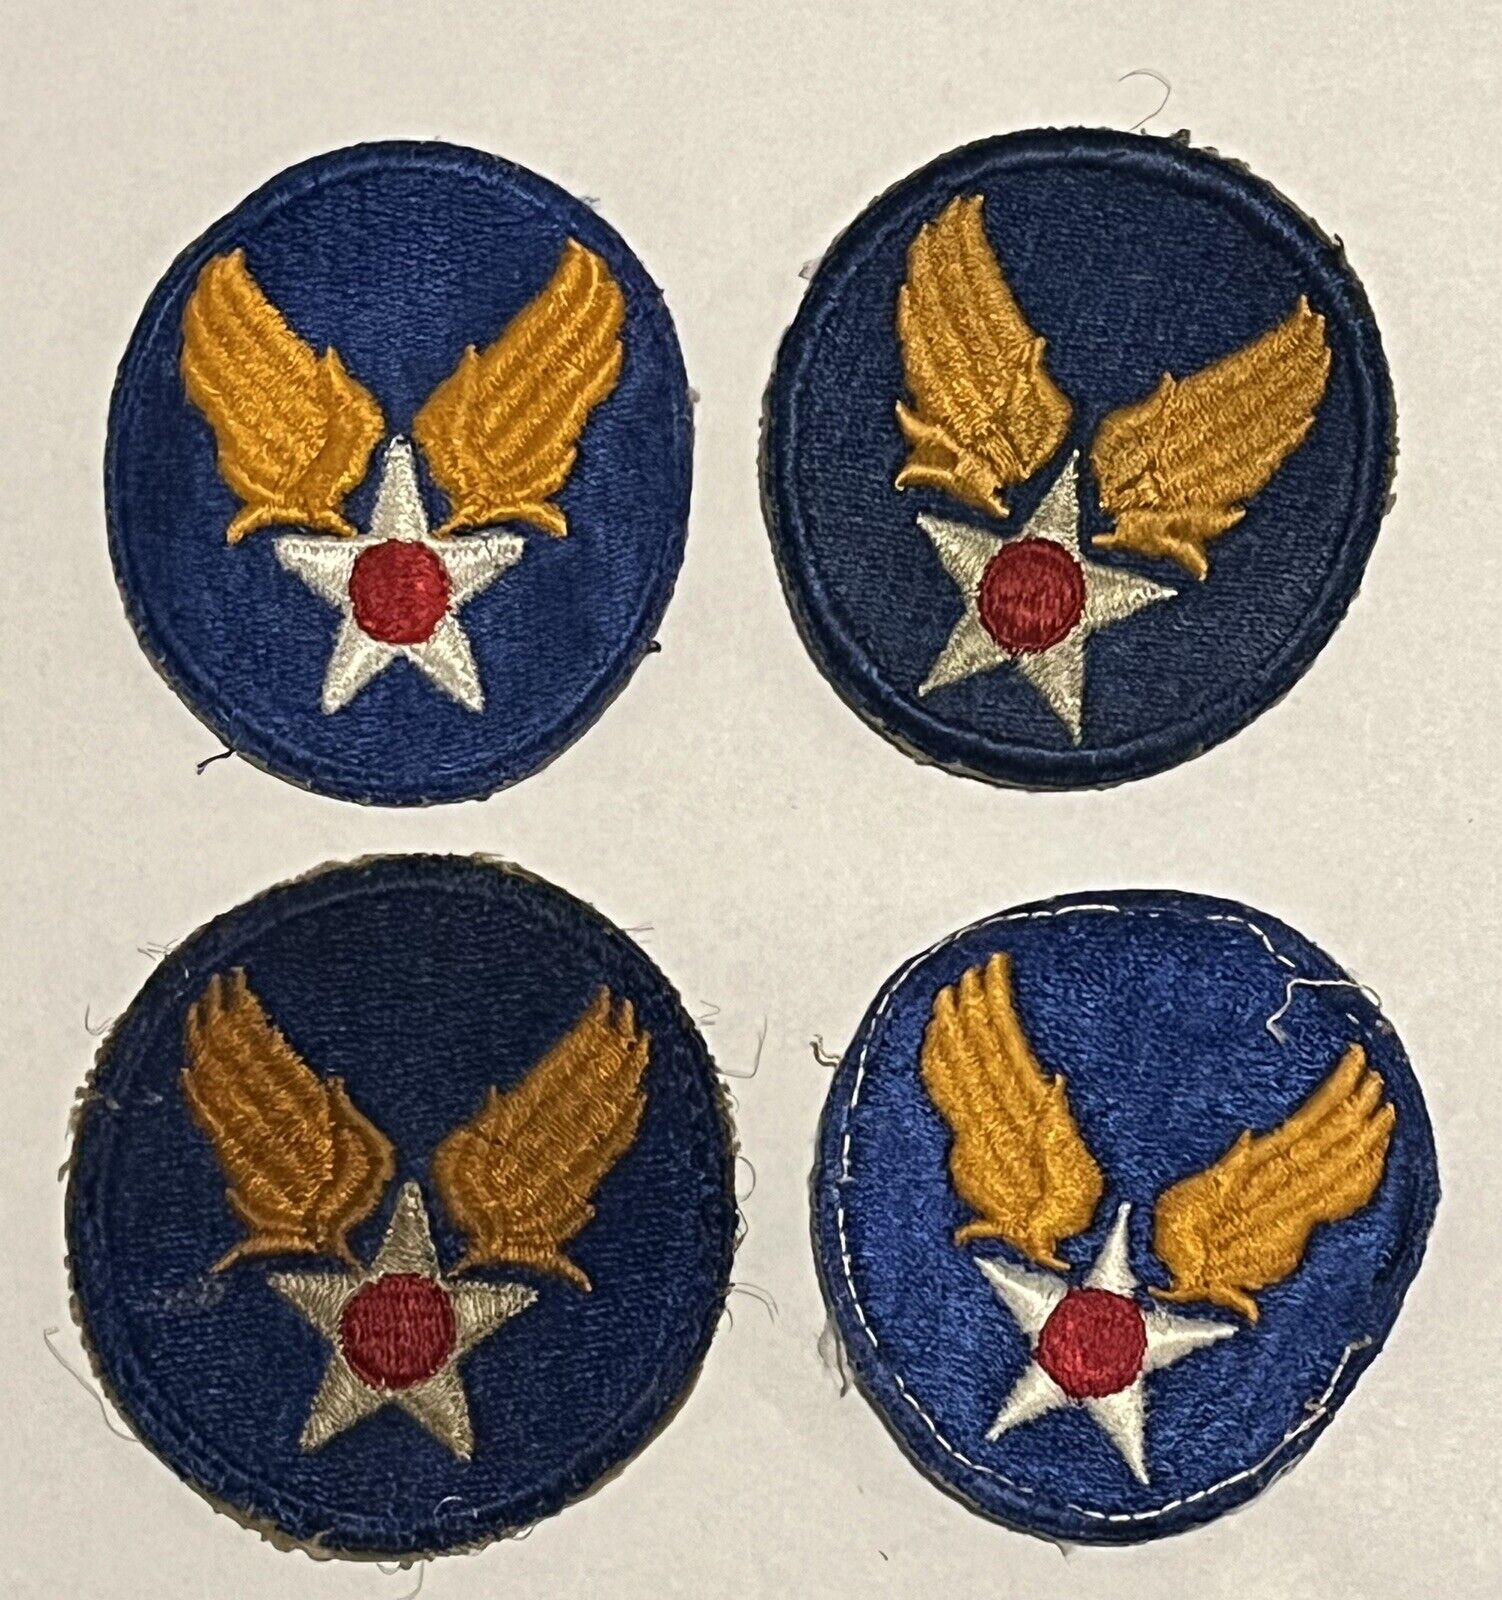 4 Vintage US Military Army AIR FORCE PATCH Insignia WWII Wings White Star Lot